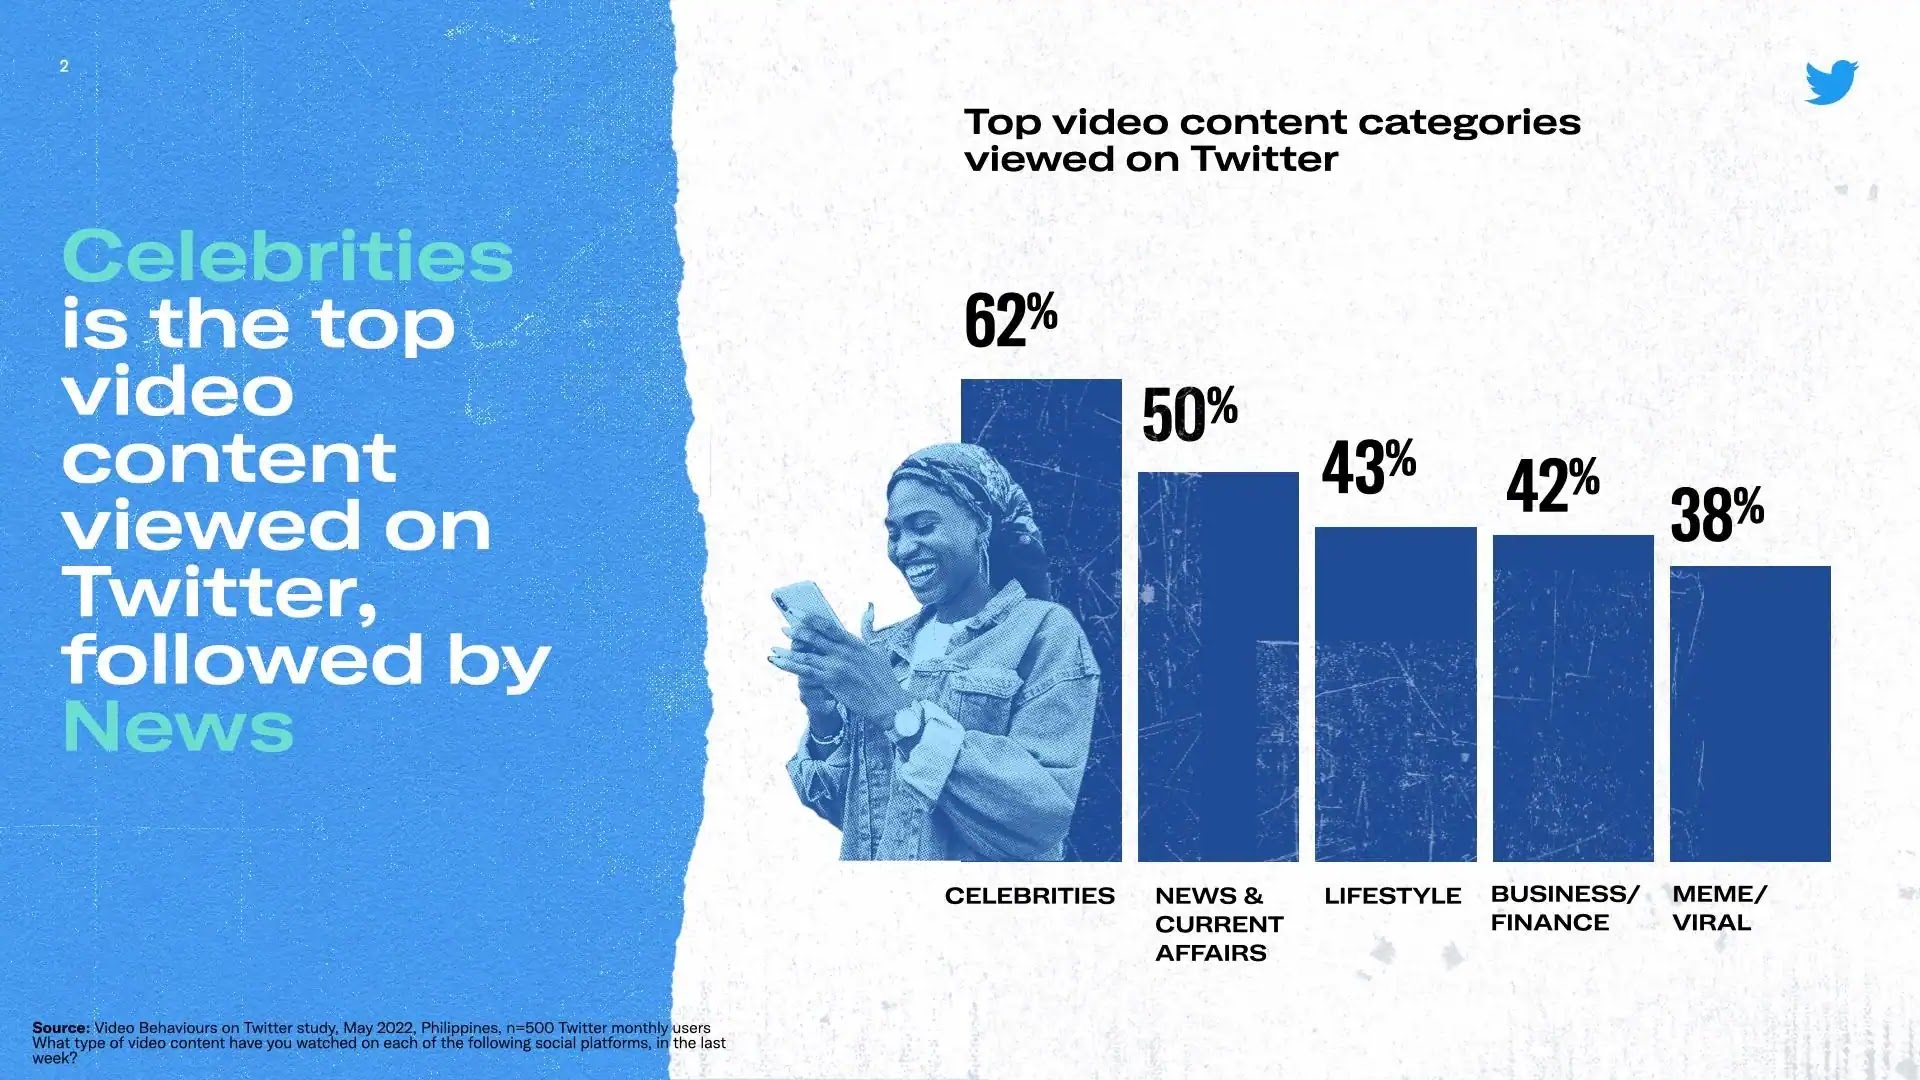 Celebrities is the top video content viewed on Twitter, followed